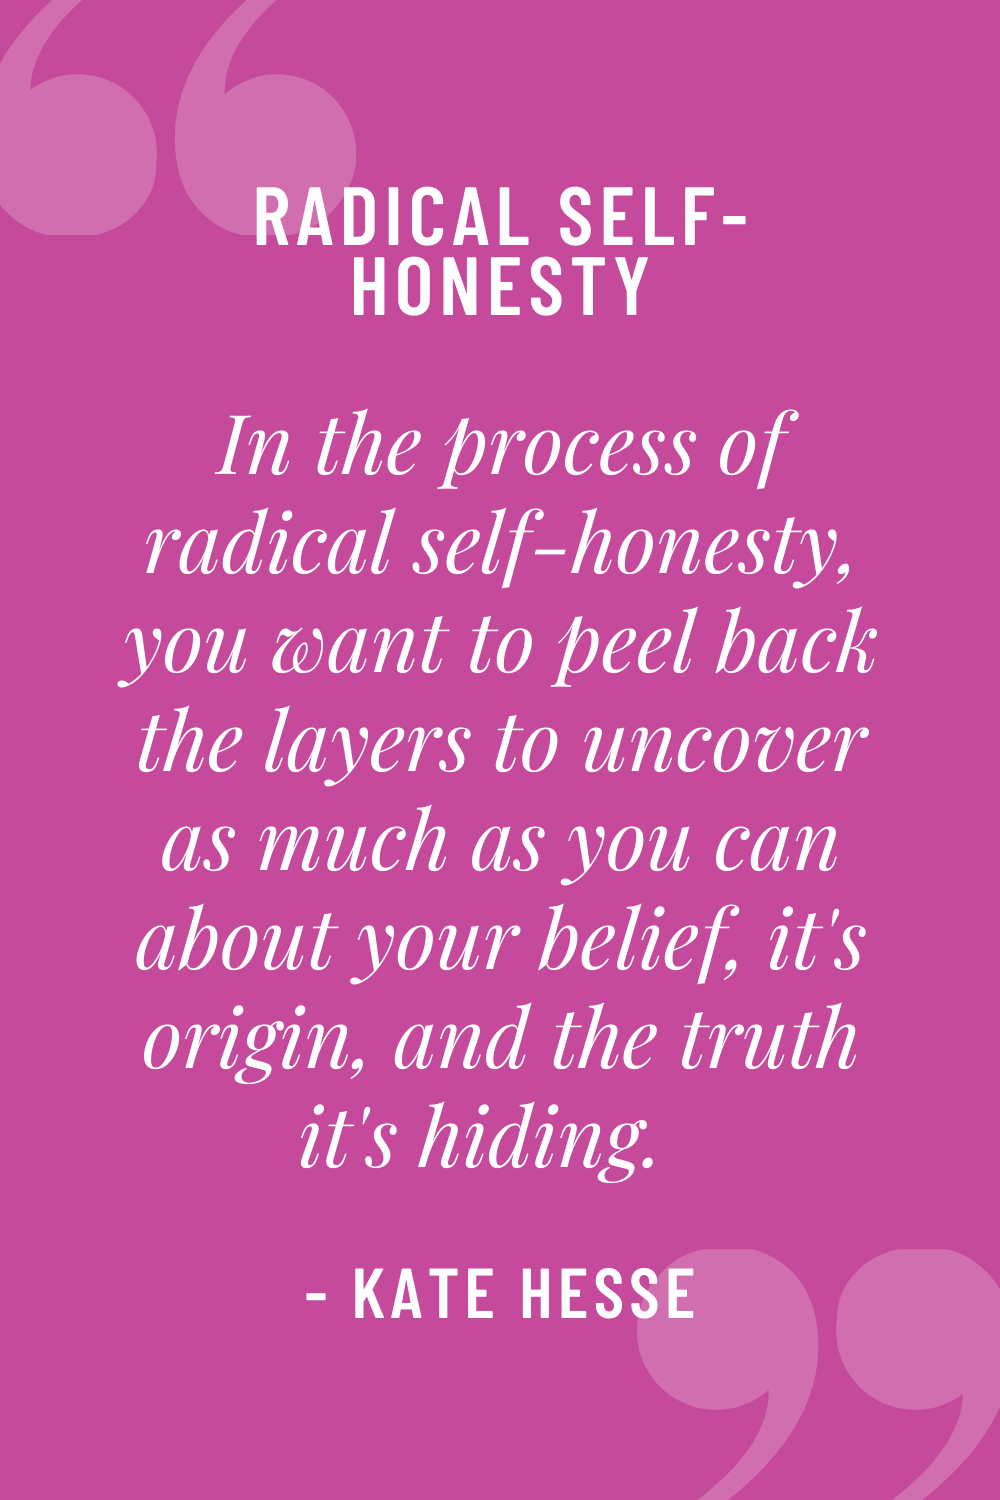 In the process of radical self-honesty, you want to peel back the layers to uncover as much as you can about your belief, it's origin, and the truth it's hiding.